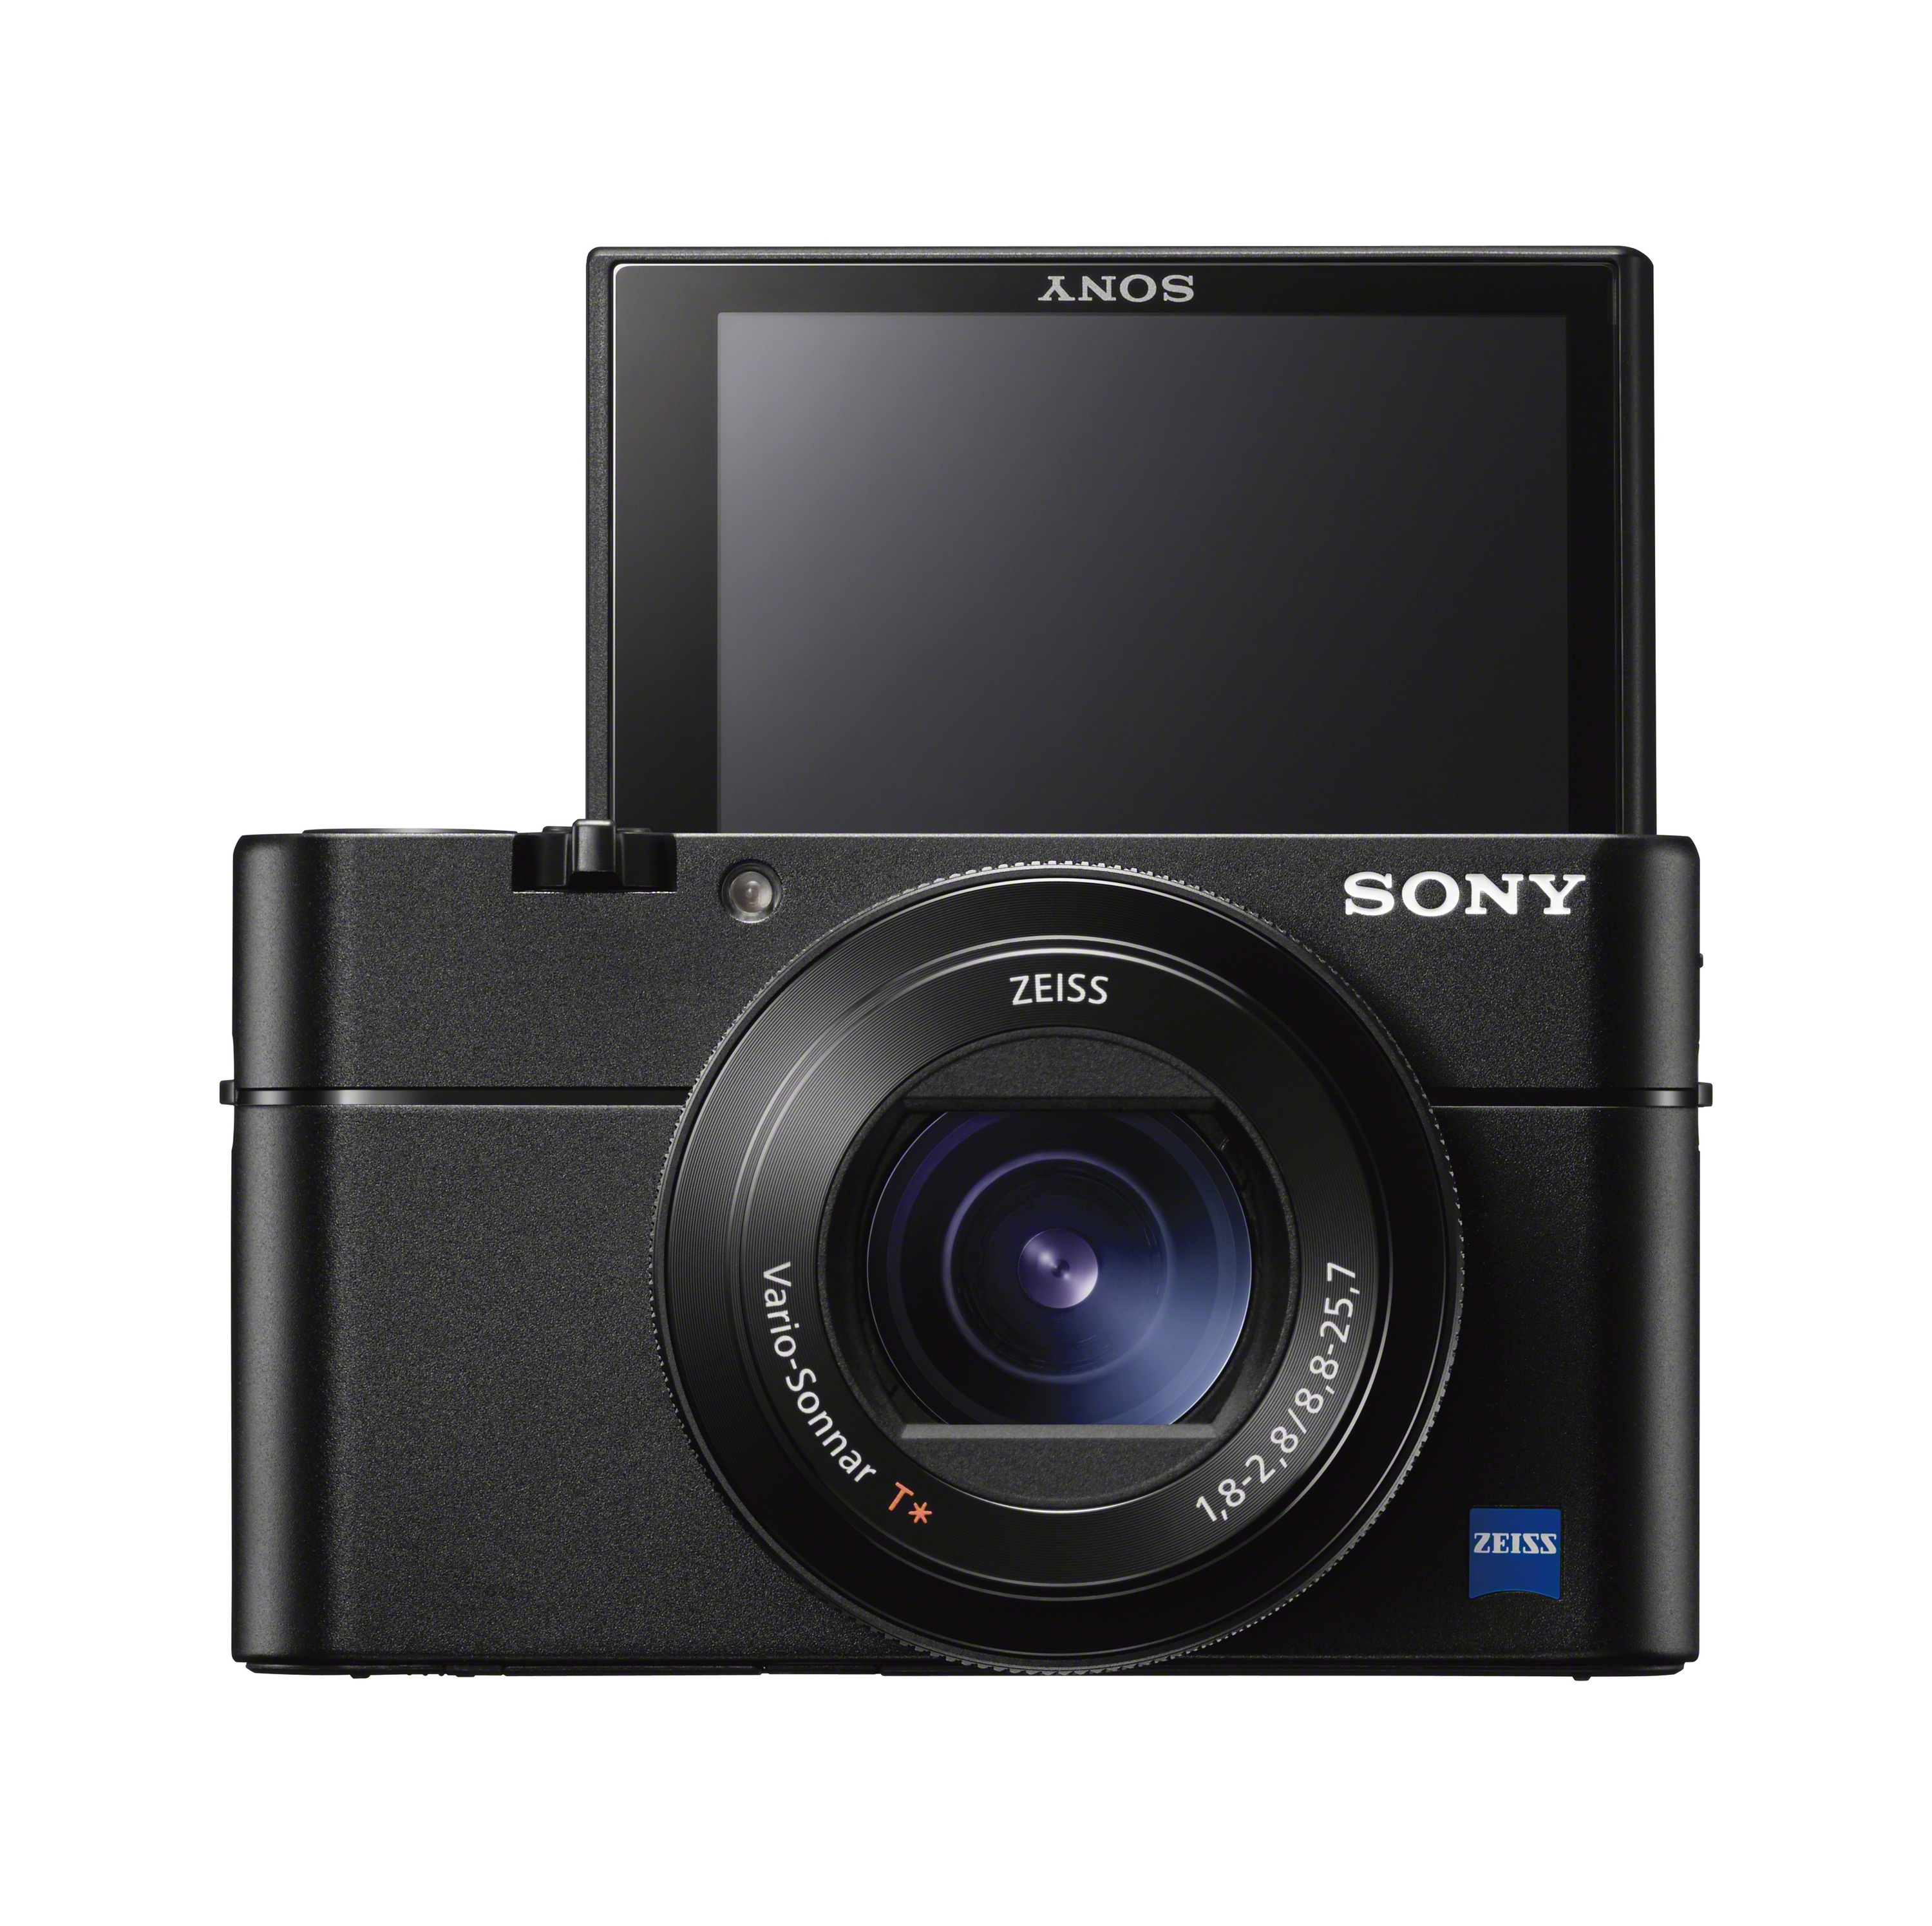 jeffontheroad-gift-ideas-photographers-youtubers-sony-rx100-v